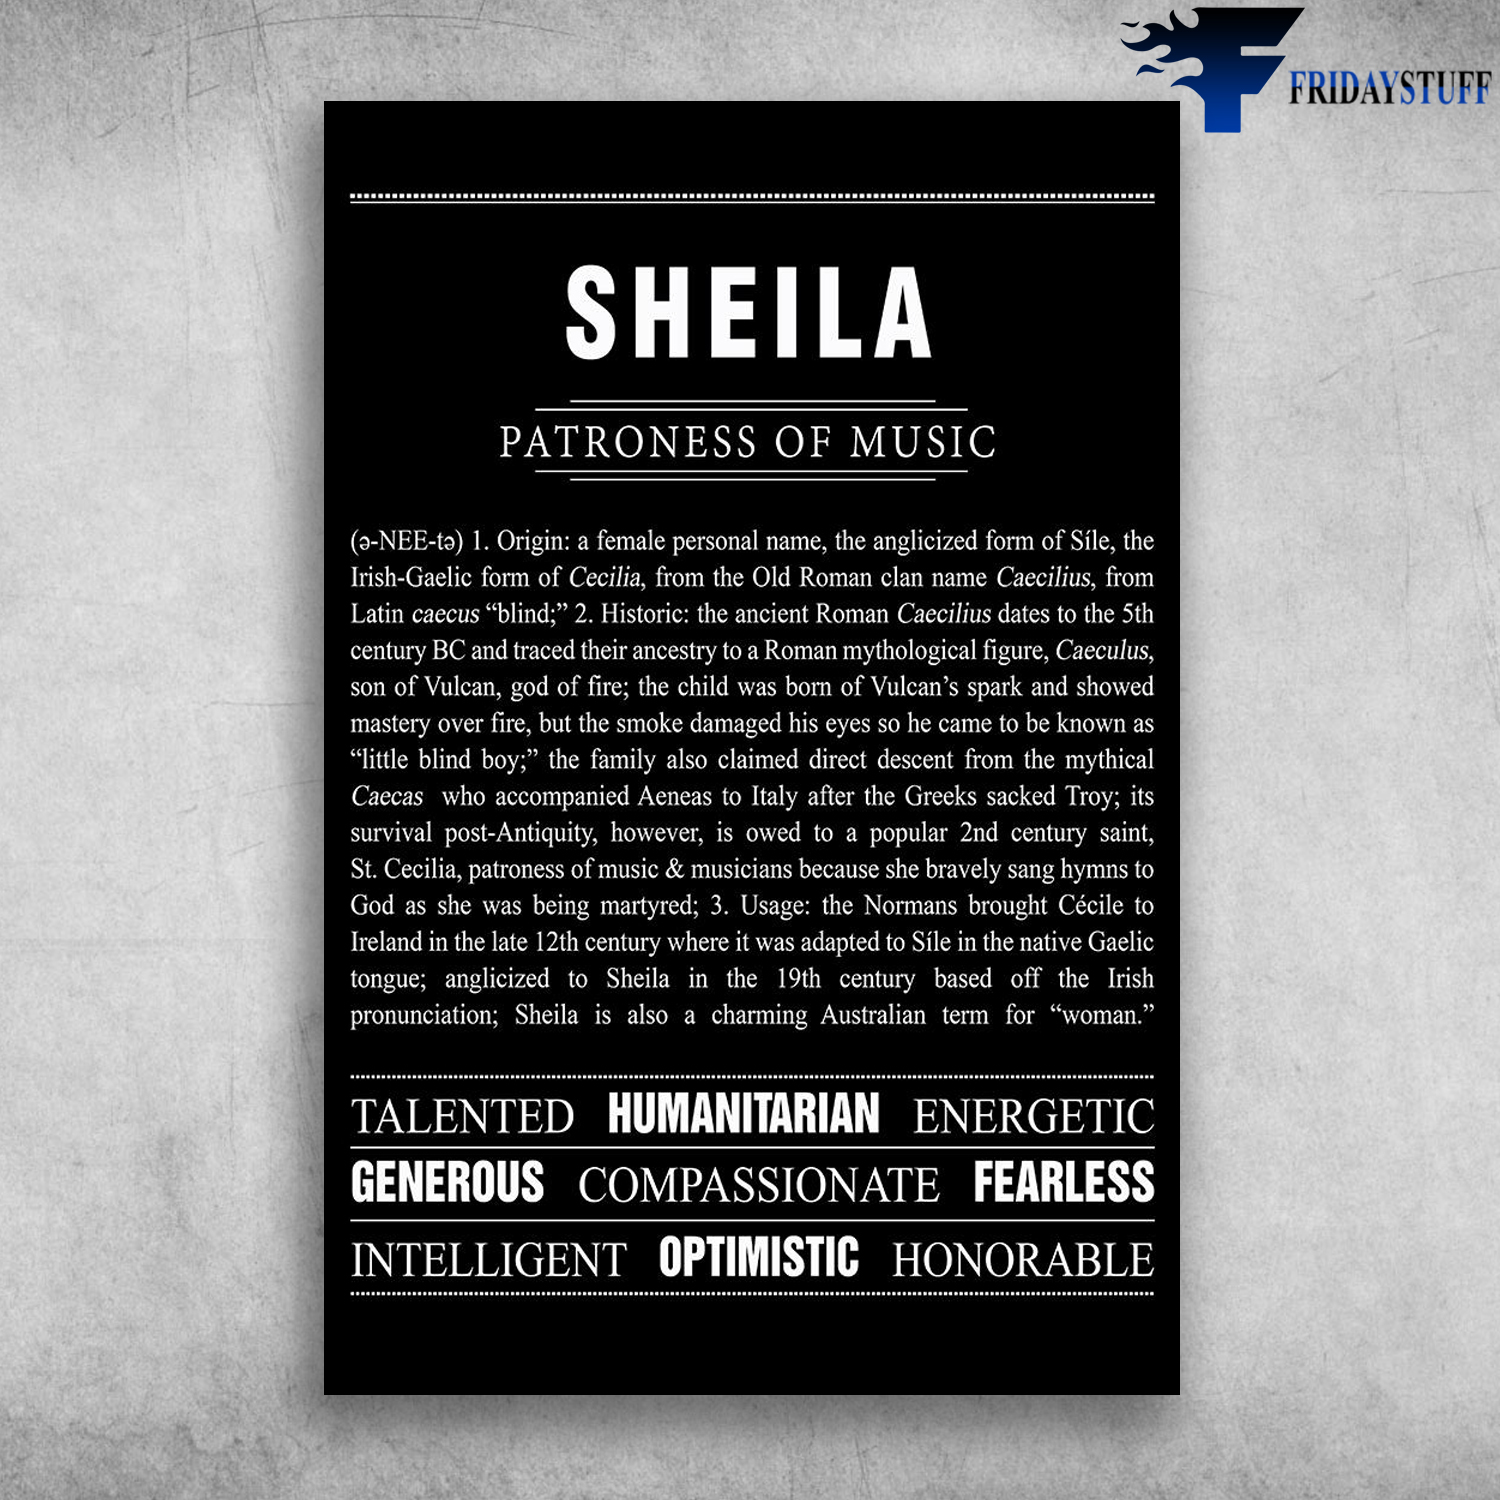 Sheila Patroness Of Music Talented Honorable